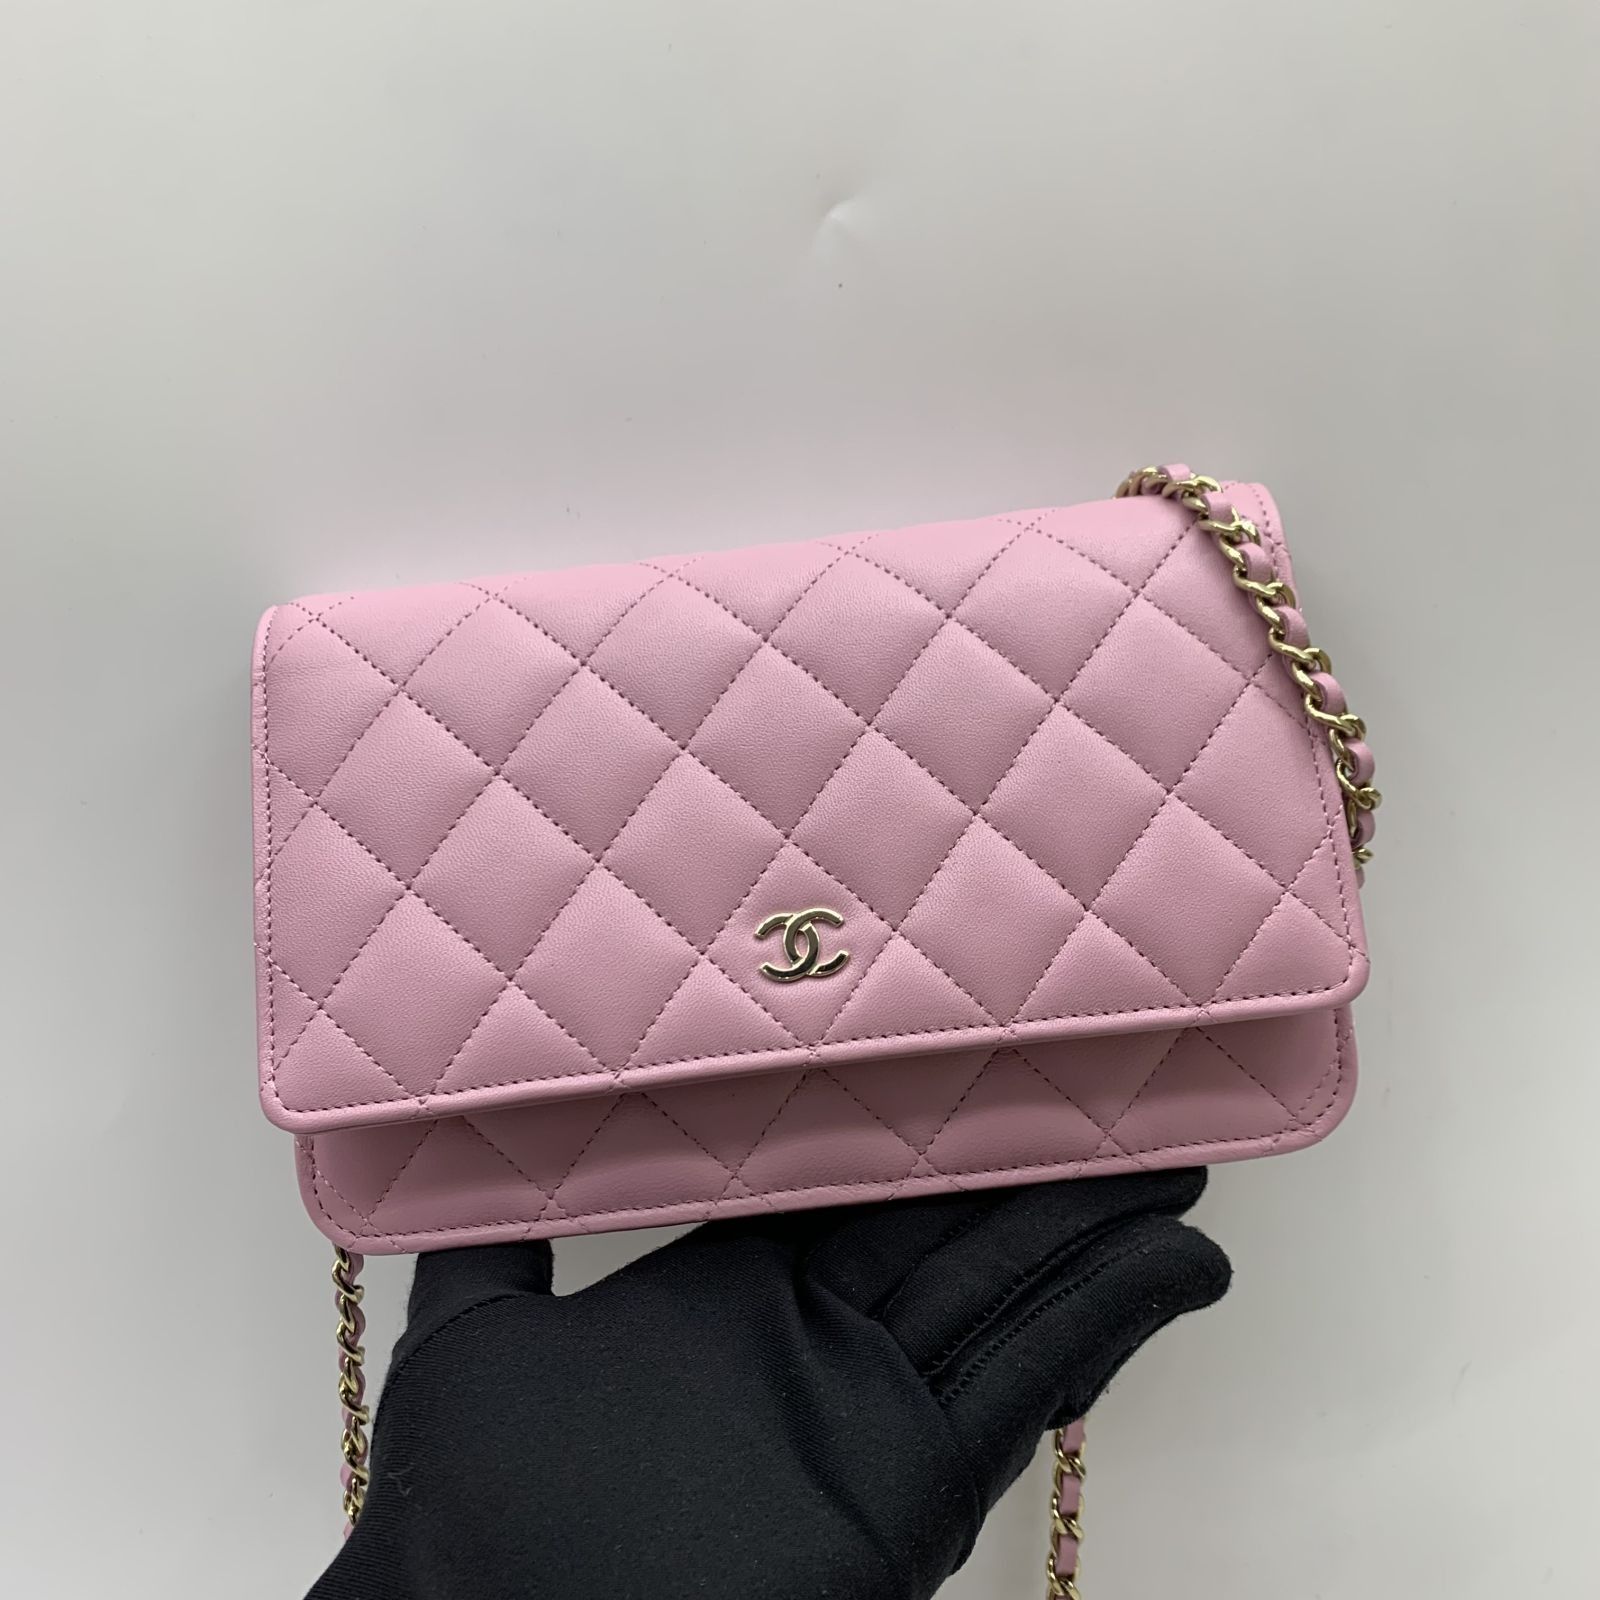 CHANEL LAMBSKIN PINK MATELASSE WALLET ON CHAIN MICROCHIPPED SHOULDER BAG  237027304 TI, Luxury, Bags & Wallets on Carousell